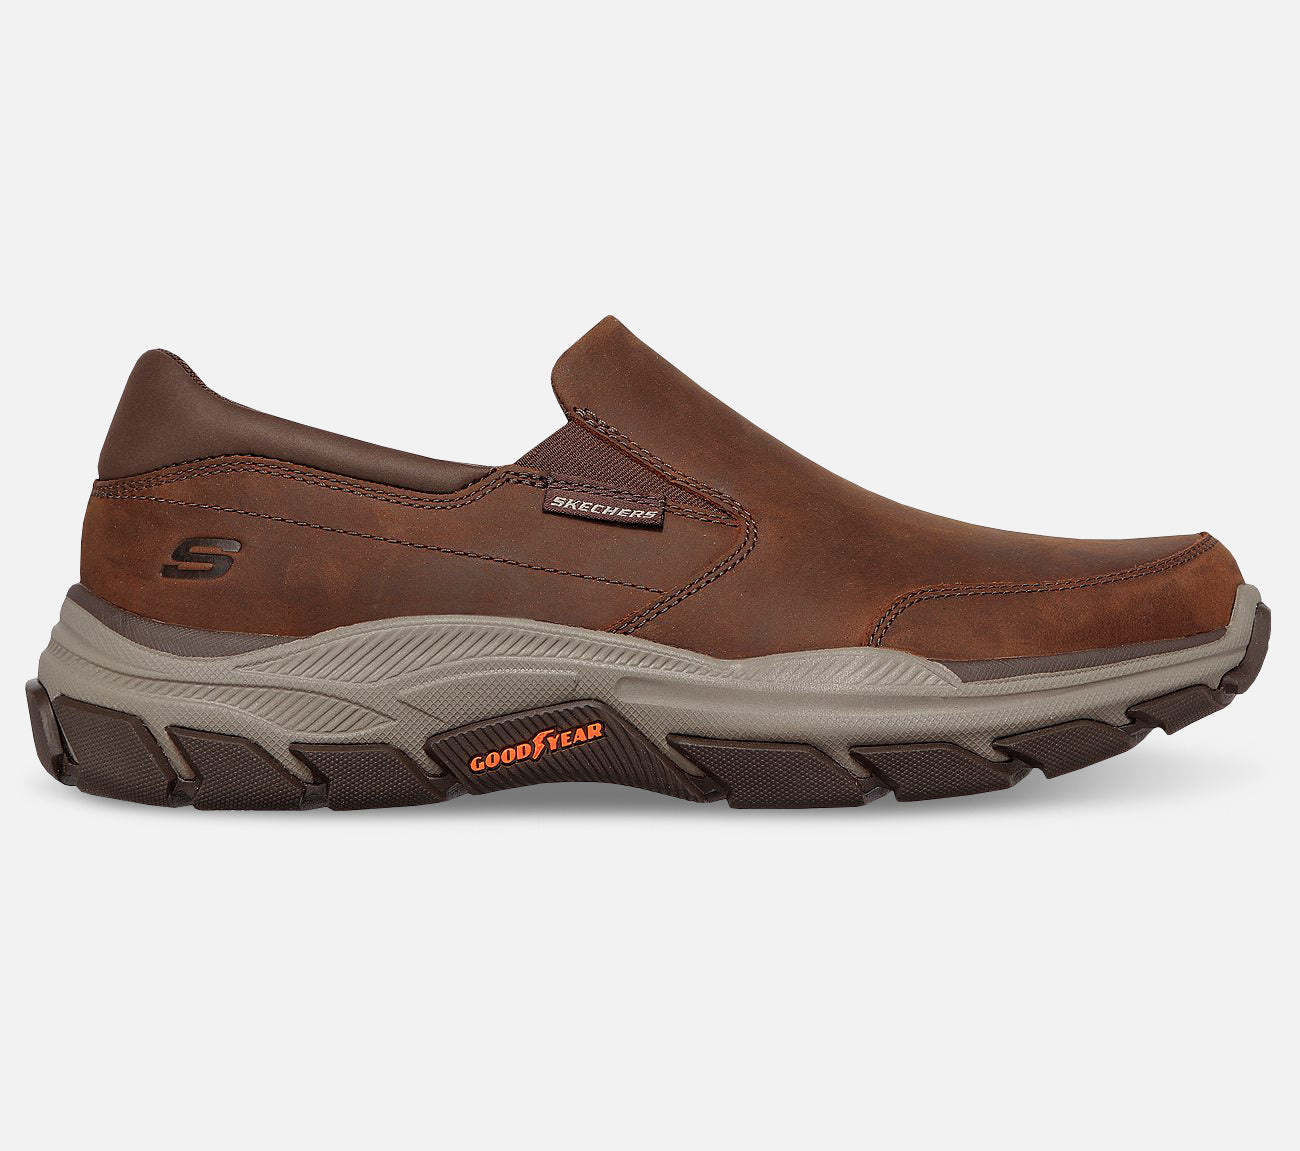 Relaxed Fit: Respected - Calum Shoe Skechers